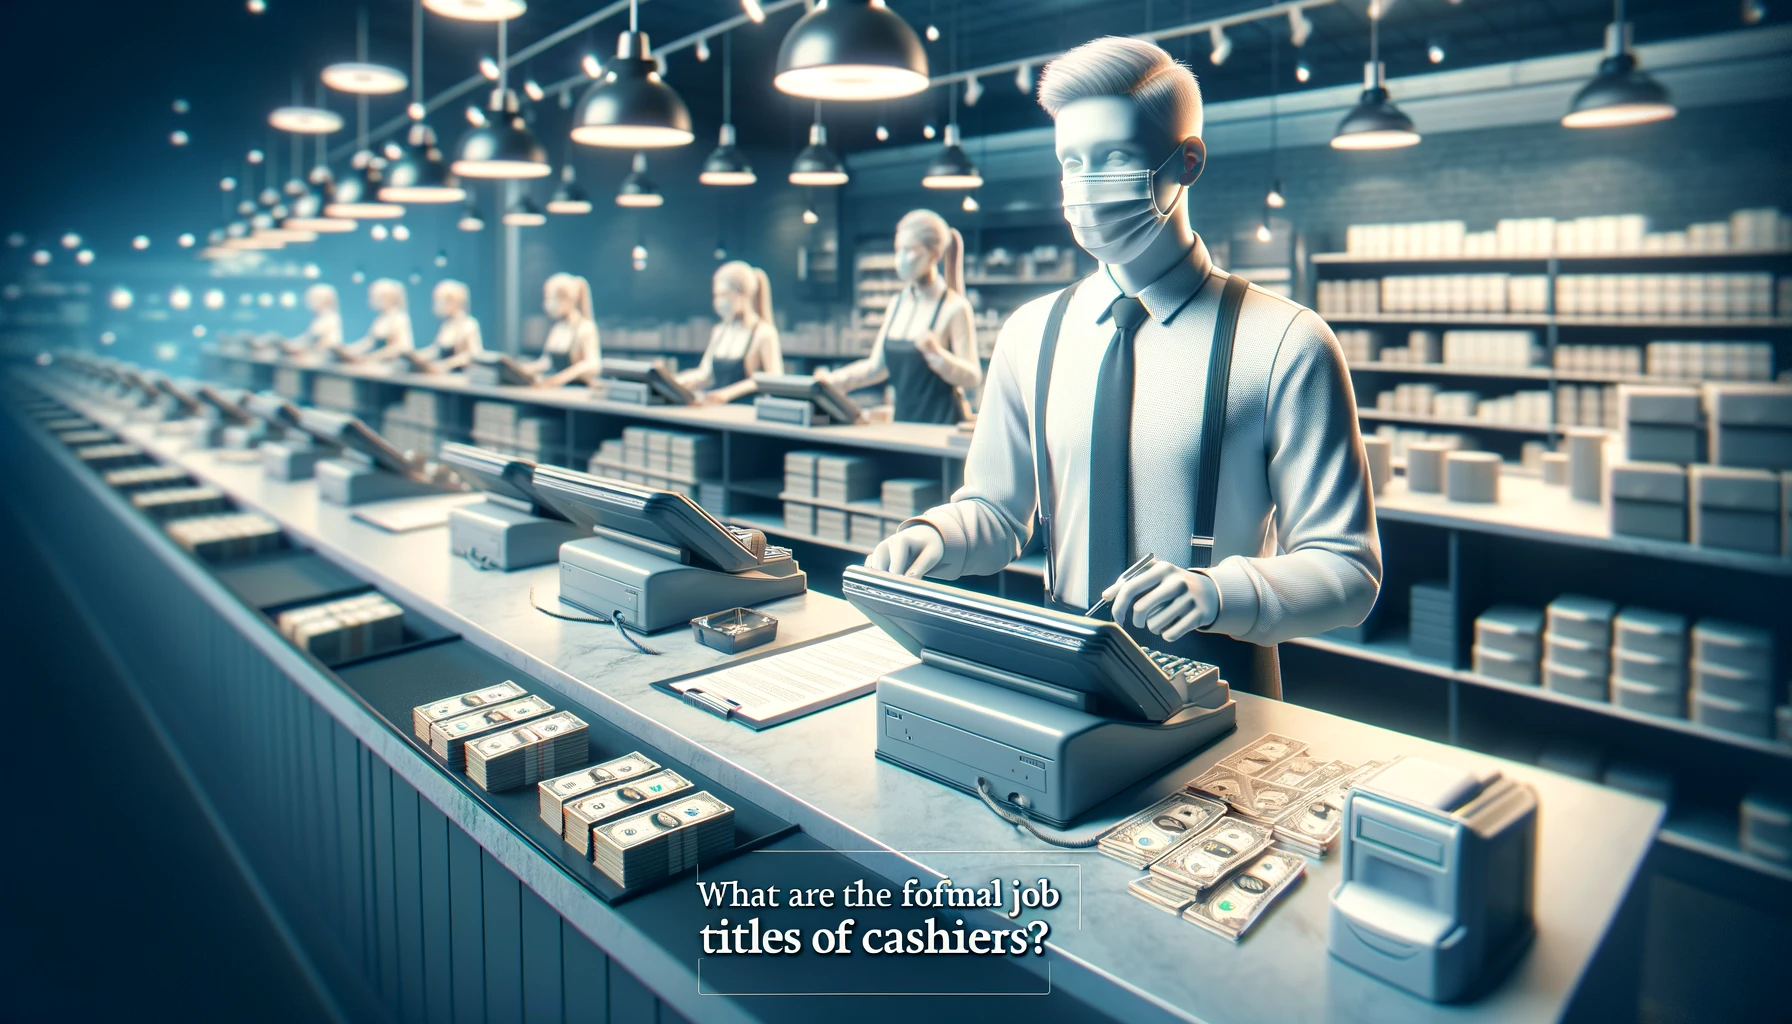 What Are the Formal Job Titles of Cashiers?